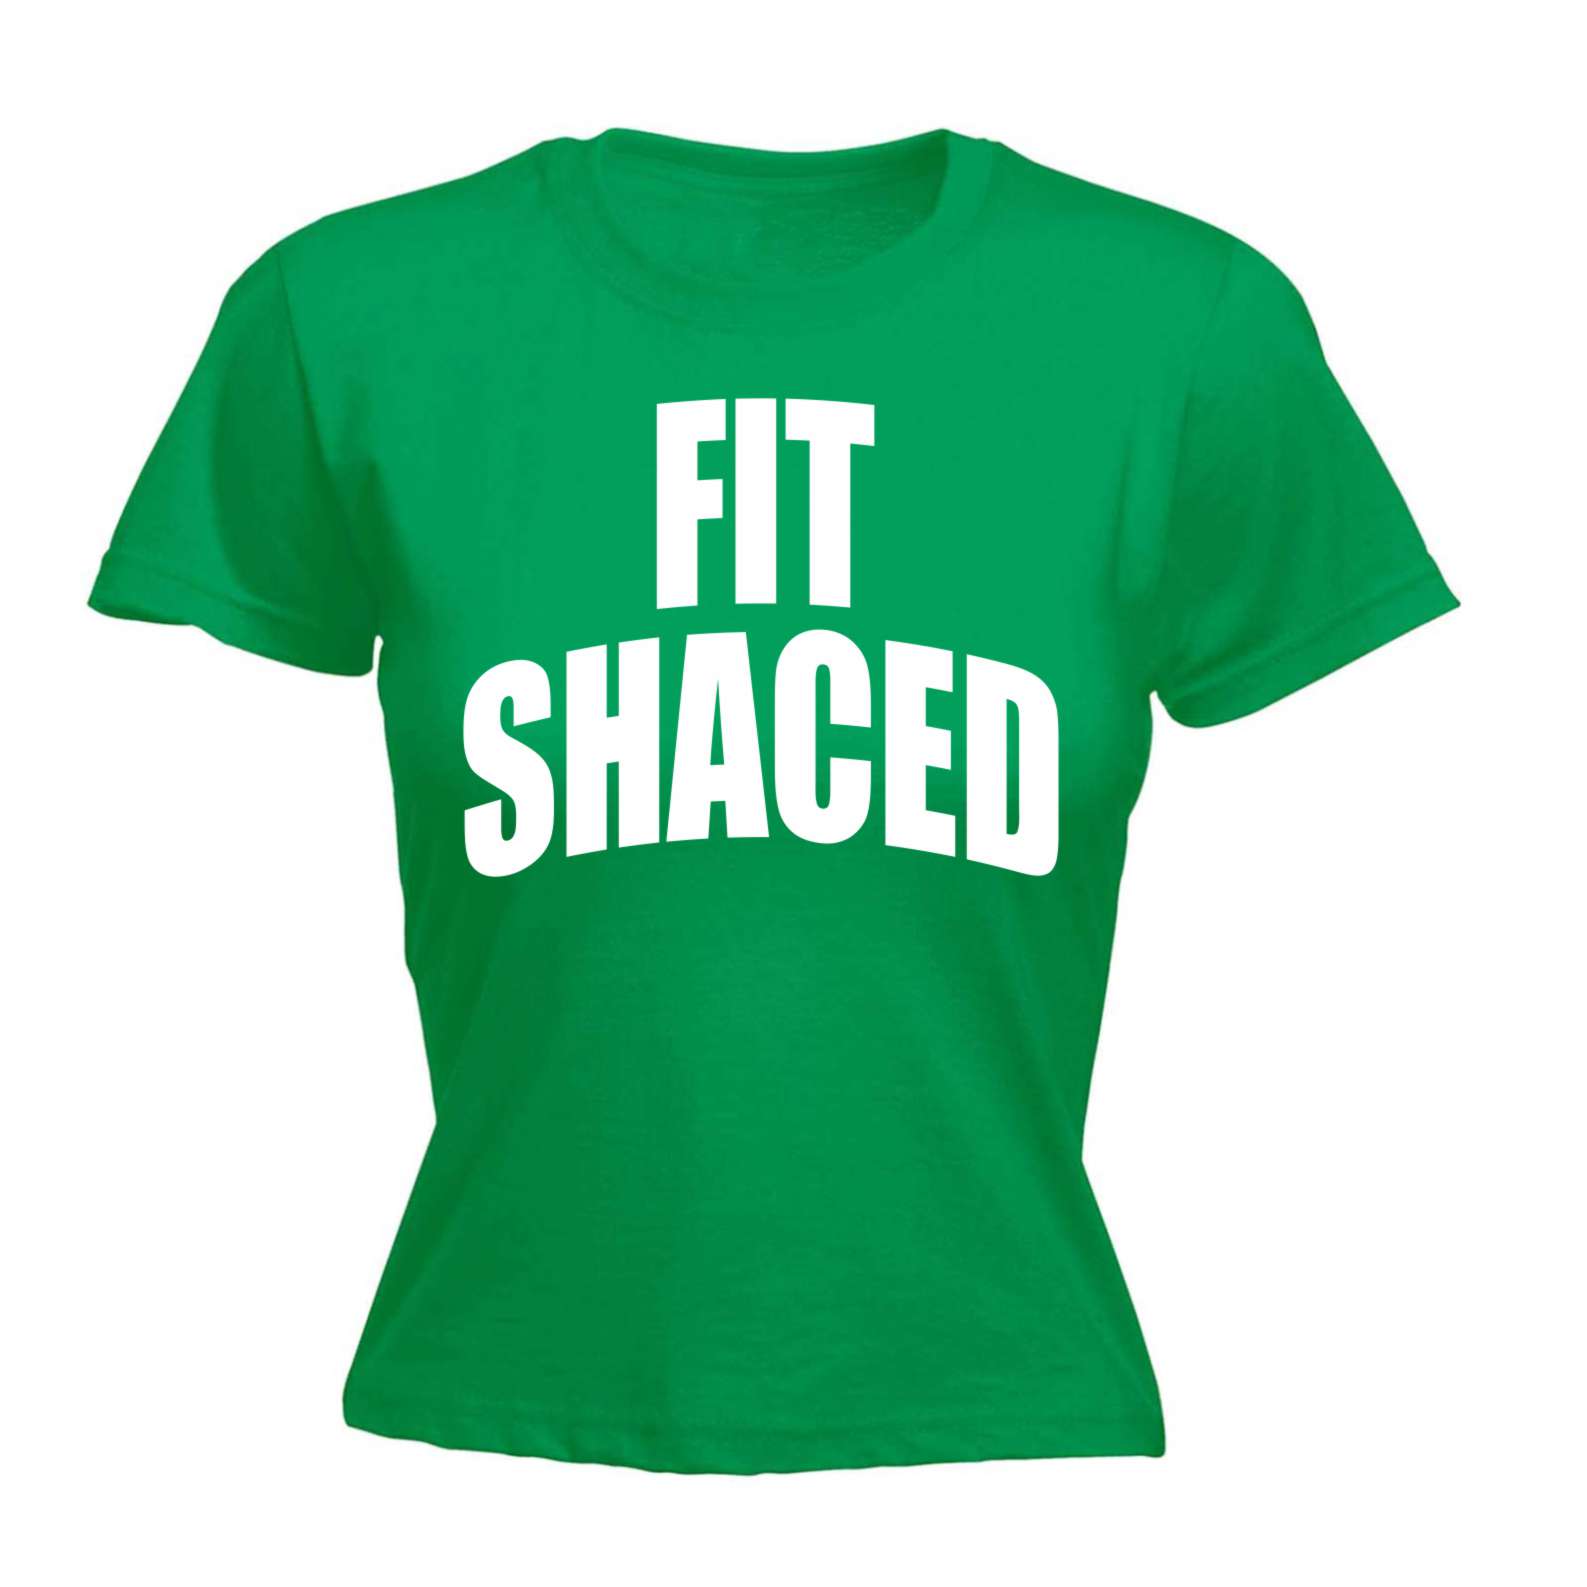 Ladies Funny Tee Fit Shaced Joke Humour Birthday Fitted T Shirt Ebay 